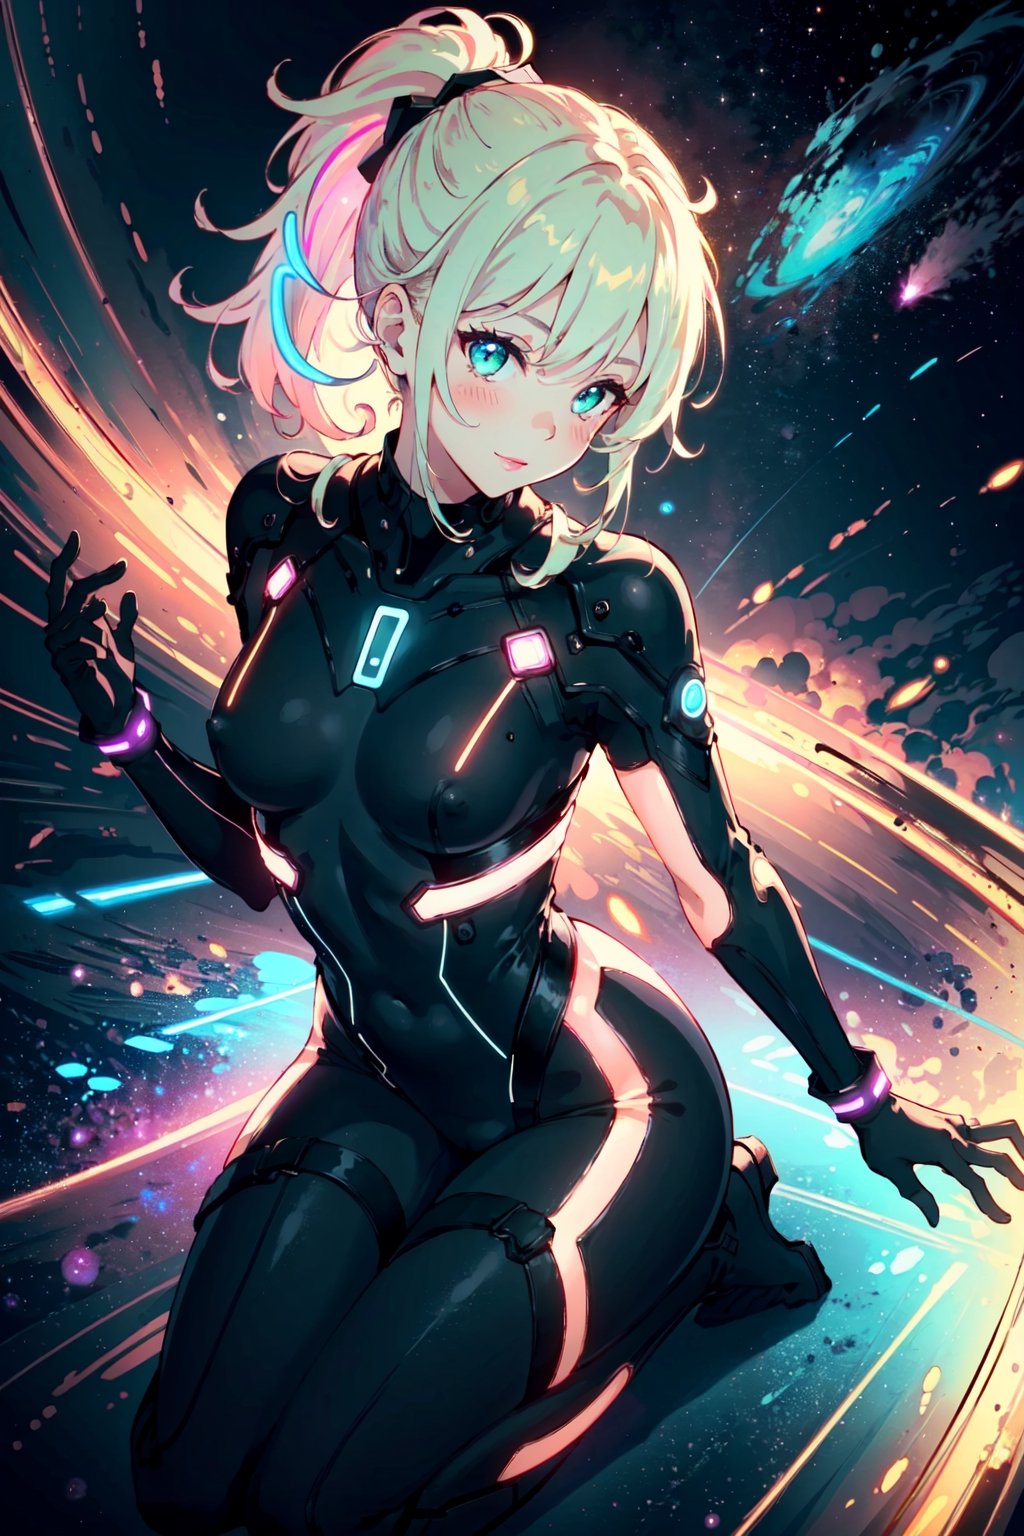 (erotic, sexy, athletic, bodysuit, elegant, aesthetic, exquisite, futuristic, cosmic, full_body:1.3, (seiza)), from-above,

blush, smile, (green-eyes), blonde-ponytail, lipstick, gloves, pussy, covered-nipples, small-breasts,

(starry_background, outer space, stars, galaxy), orbital, light-particles, (neon lights:1.3),

white, orange, pink, (violet), red, purple, lime, vanilla, porcelain, azure, enhanced colors, bokeh, 35mm-lens, glowing light, neon illumination,

(masterpiece, best quality, perfect visual), 8K, HDR, sharp image, professional artwork, (detailed, intricate),